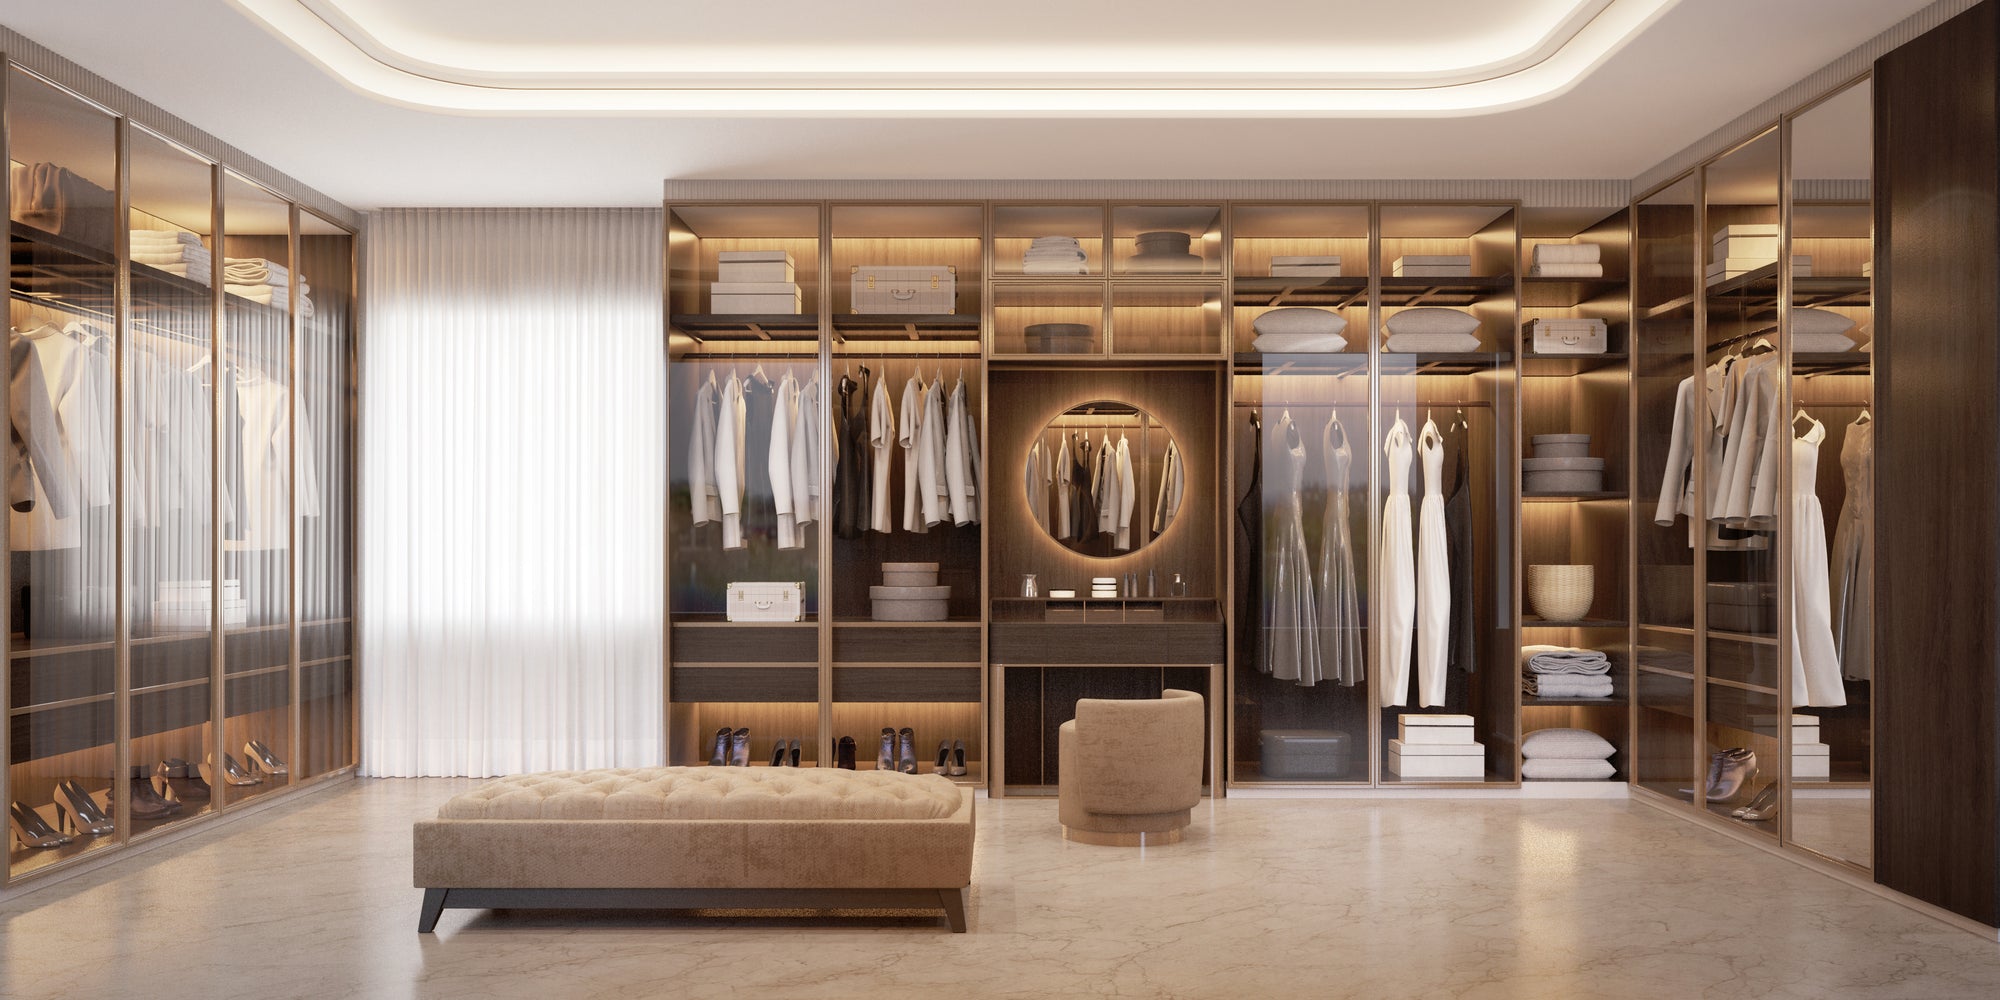 Luxury Closet with Safe Installed